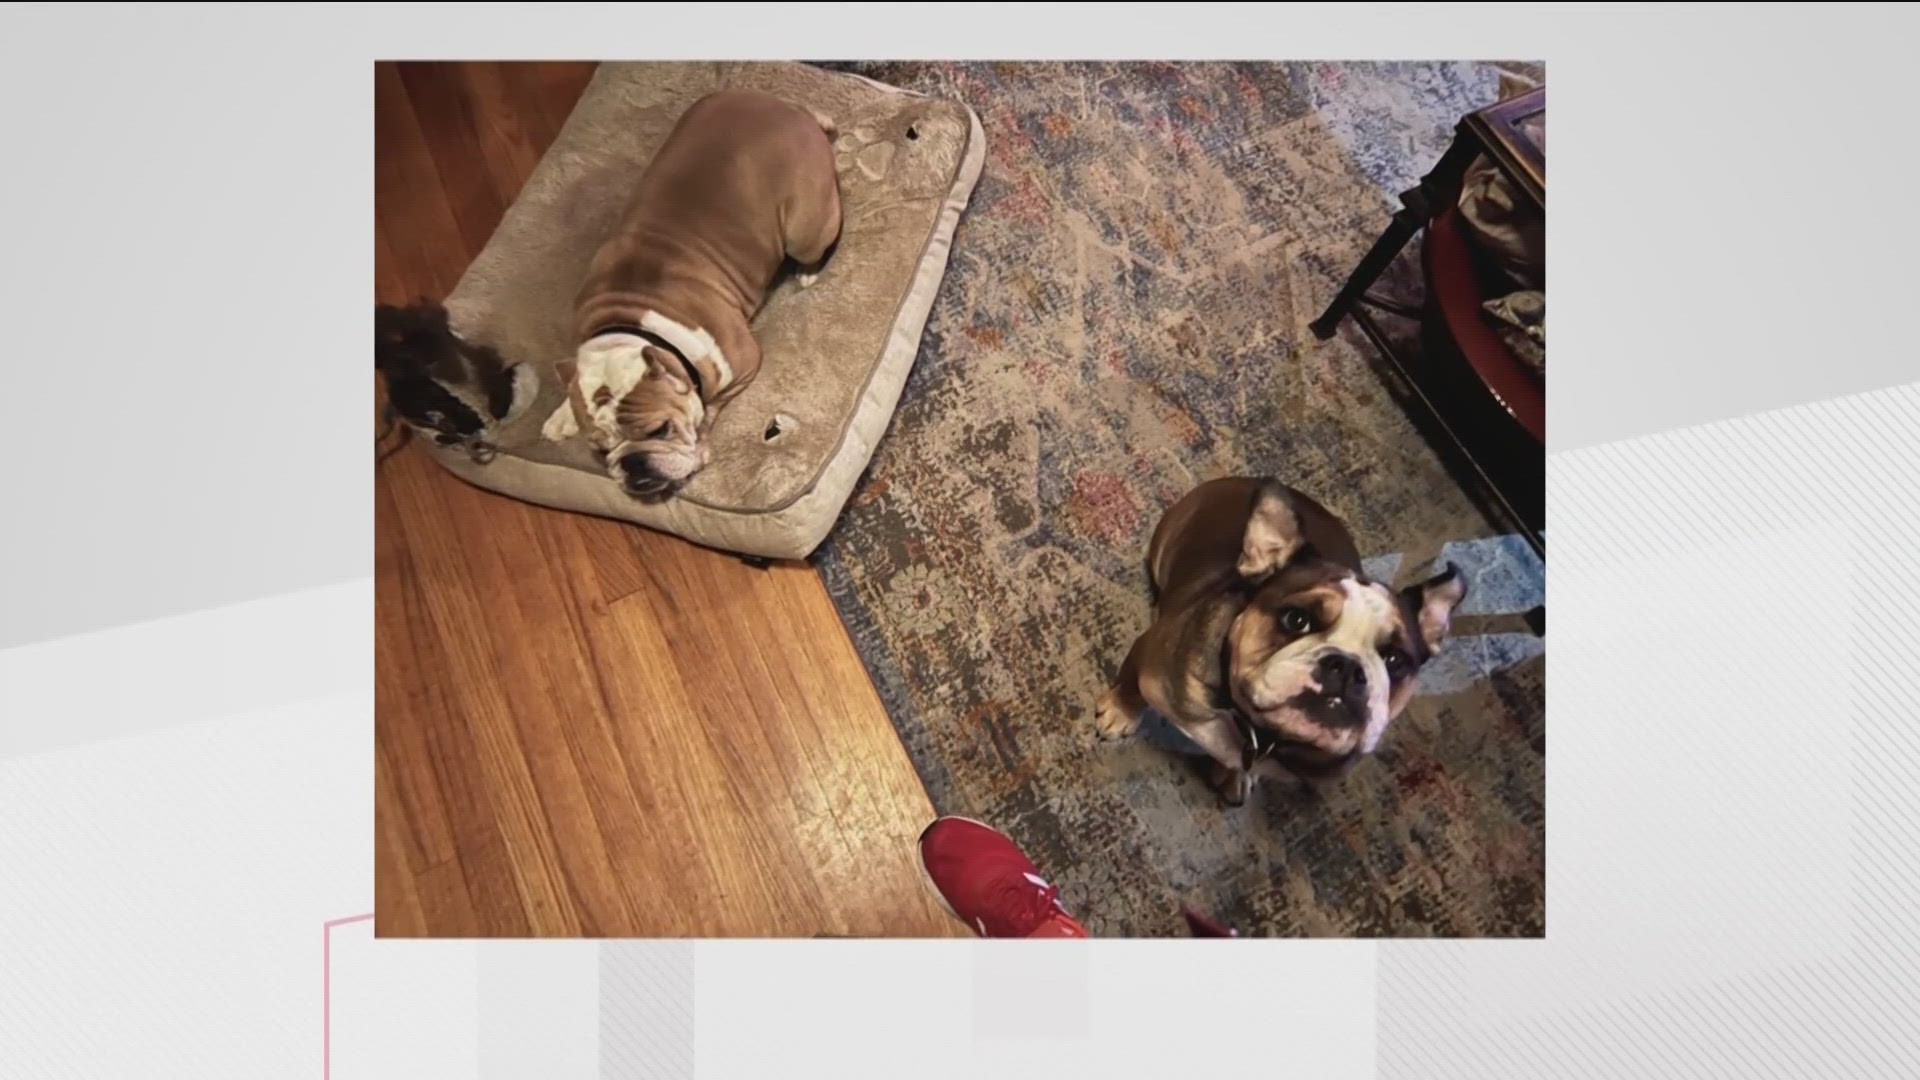 Scotch and Stogie, a pair of beloved Bulldogs who were stolen Sunday evening while on a peaceful stroll, are back home with their owners.